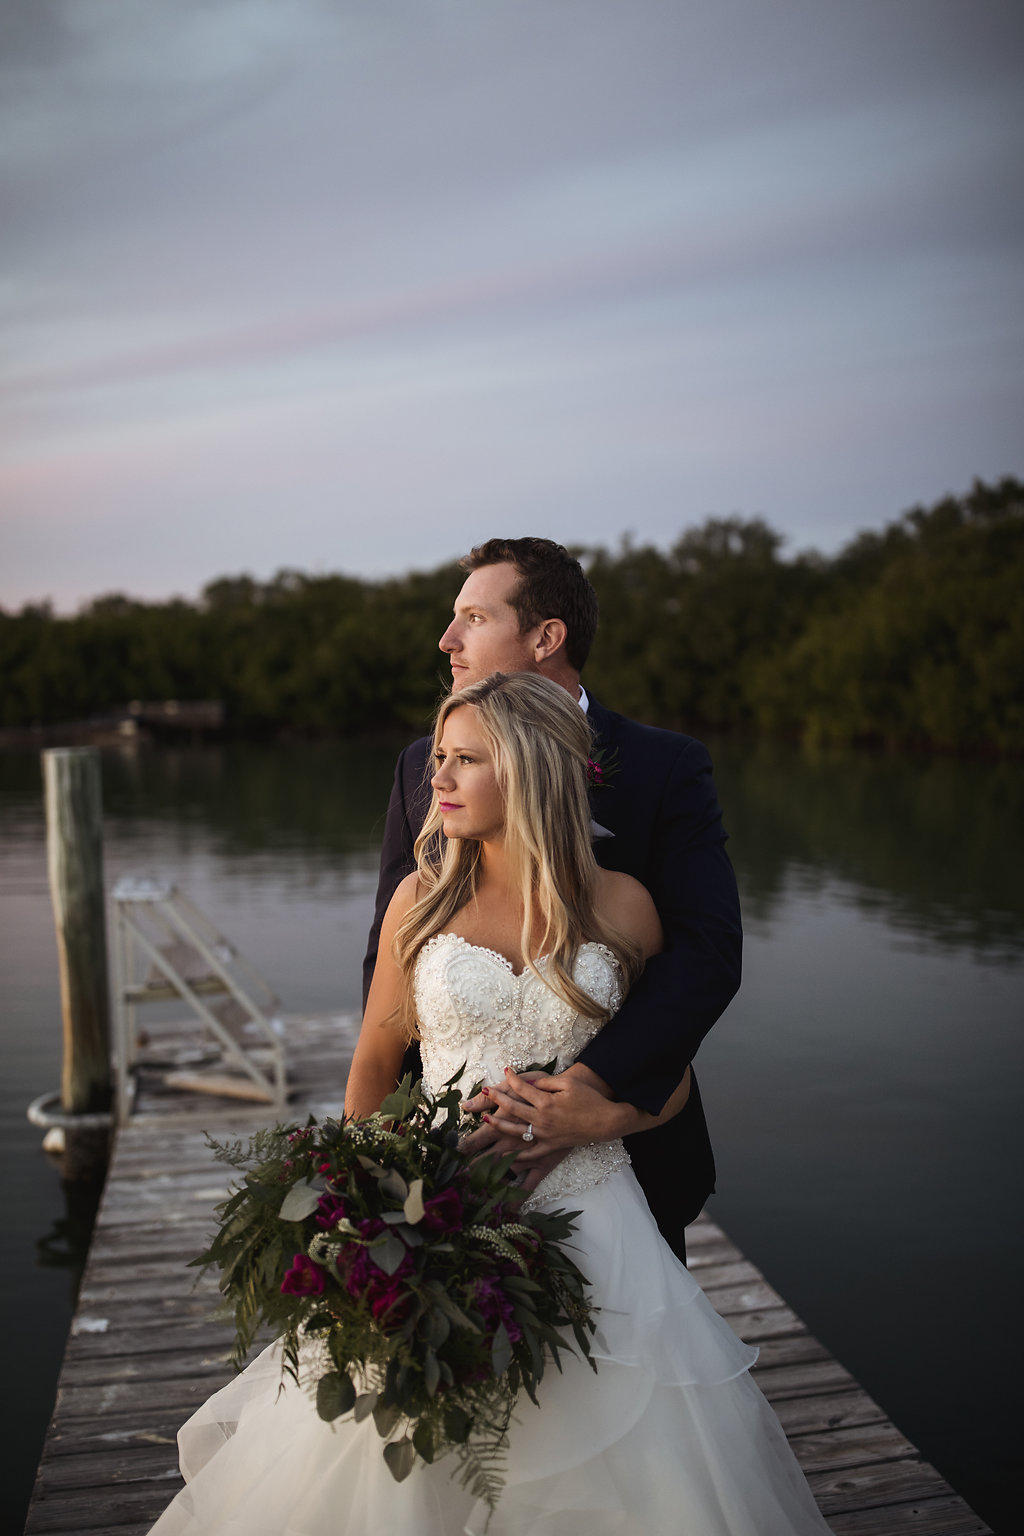 Outdoor Waterfront Dock Wedding Portrait, Bride in Strapless Beaded Layered Ballgown Dress with Fuchsia Floral and tropical Greenery Bouquet | Venue Longboat Island Chapel